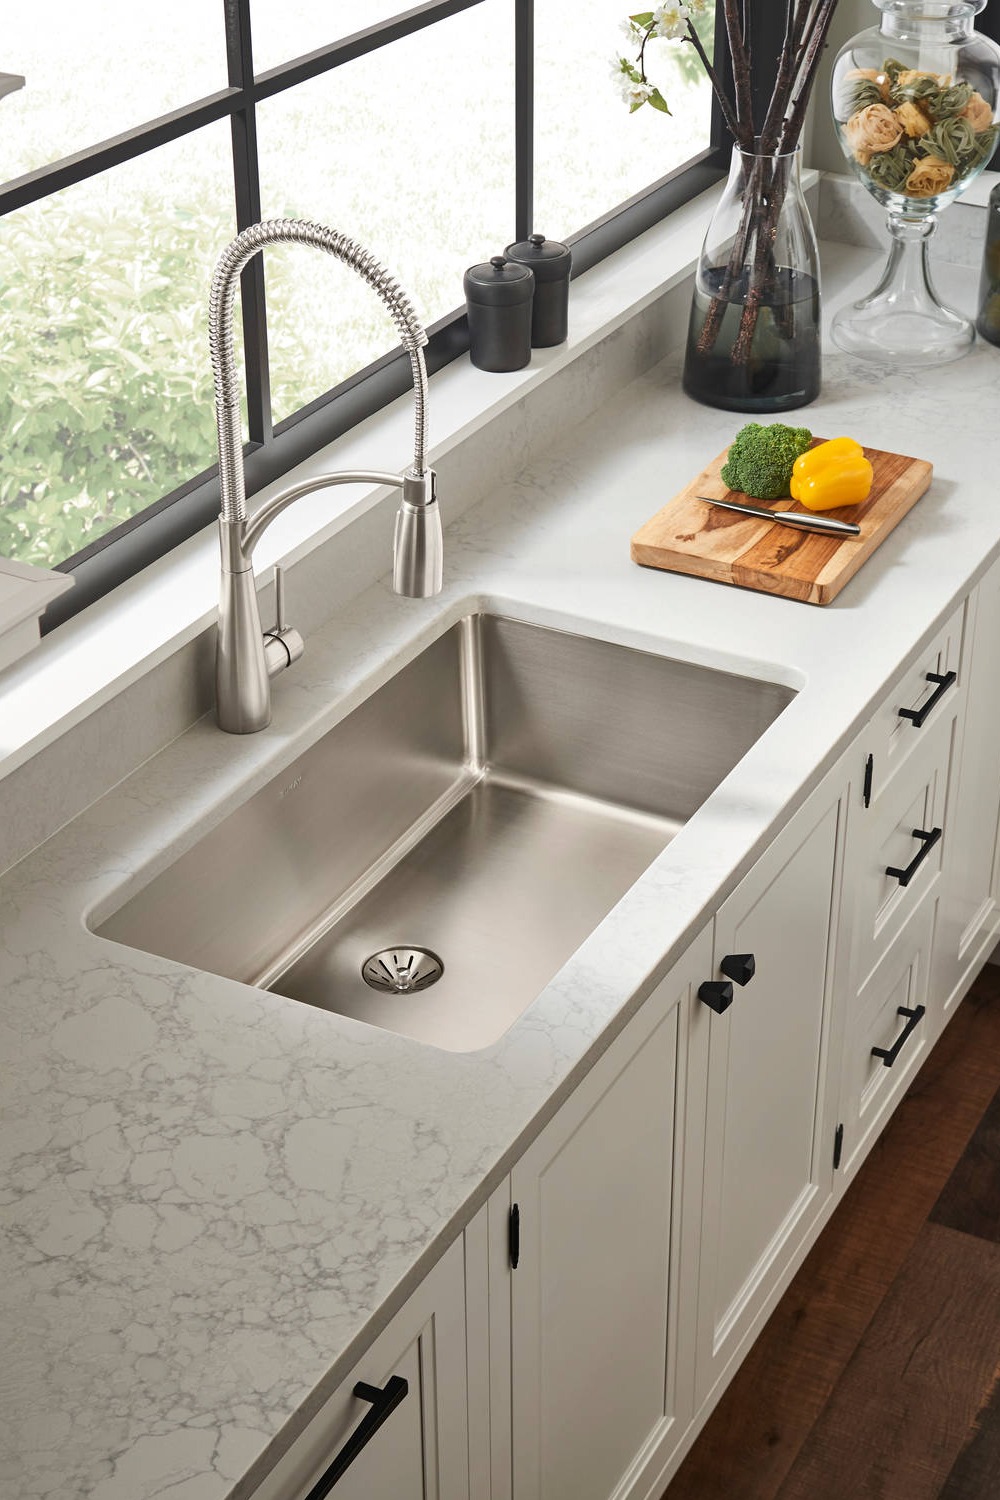 Stainless Steel Undermount Sinks Kitchen Sink Countertop Space Single Bowl Style Room